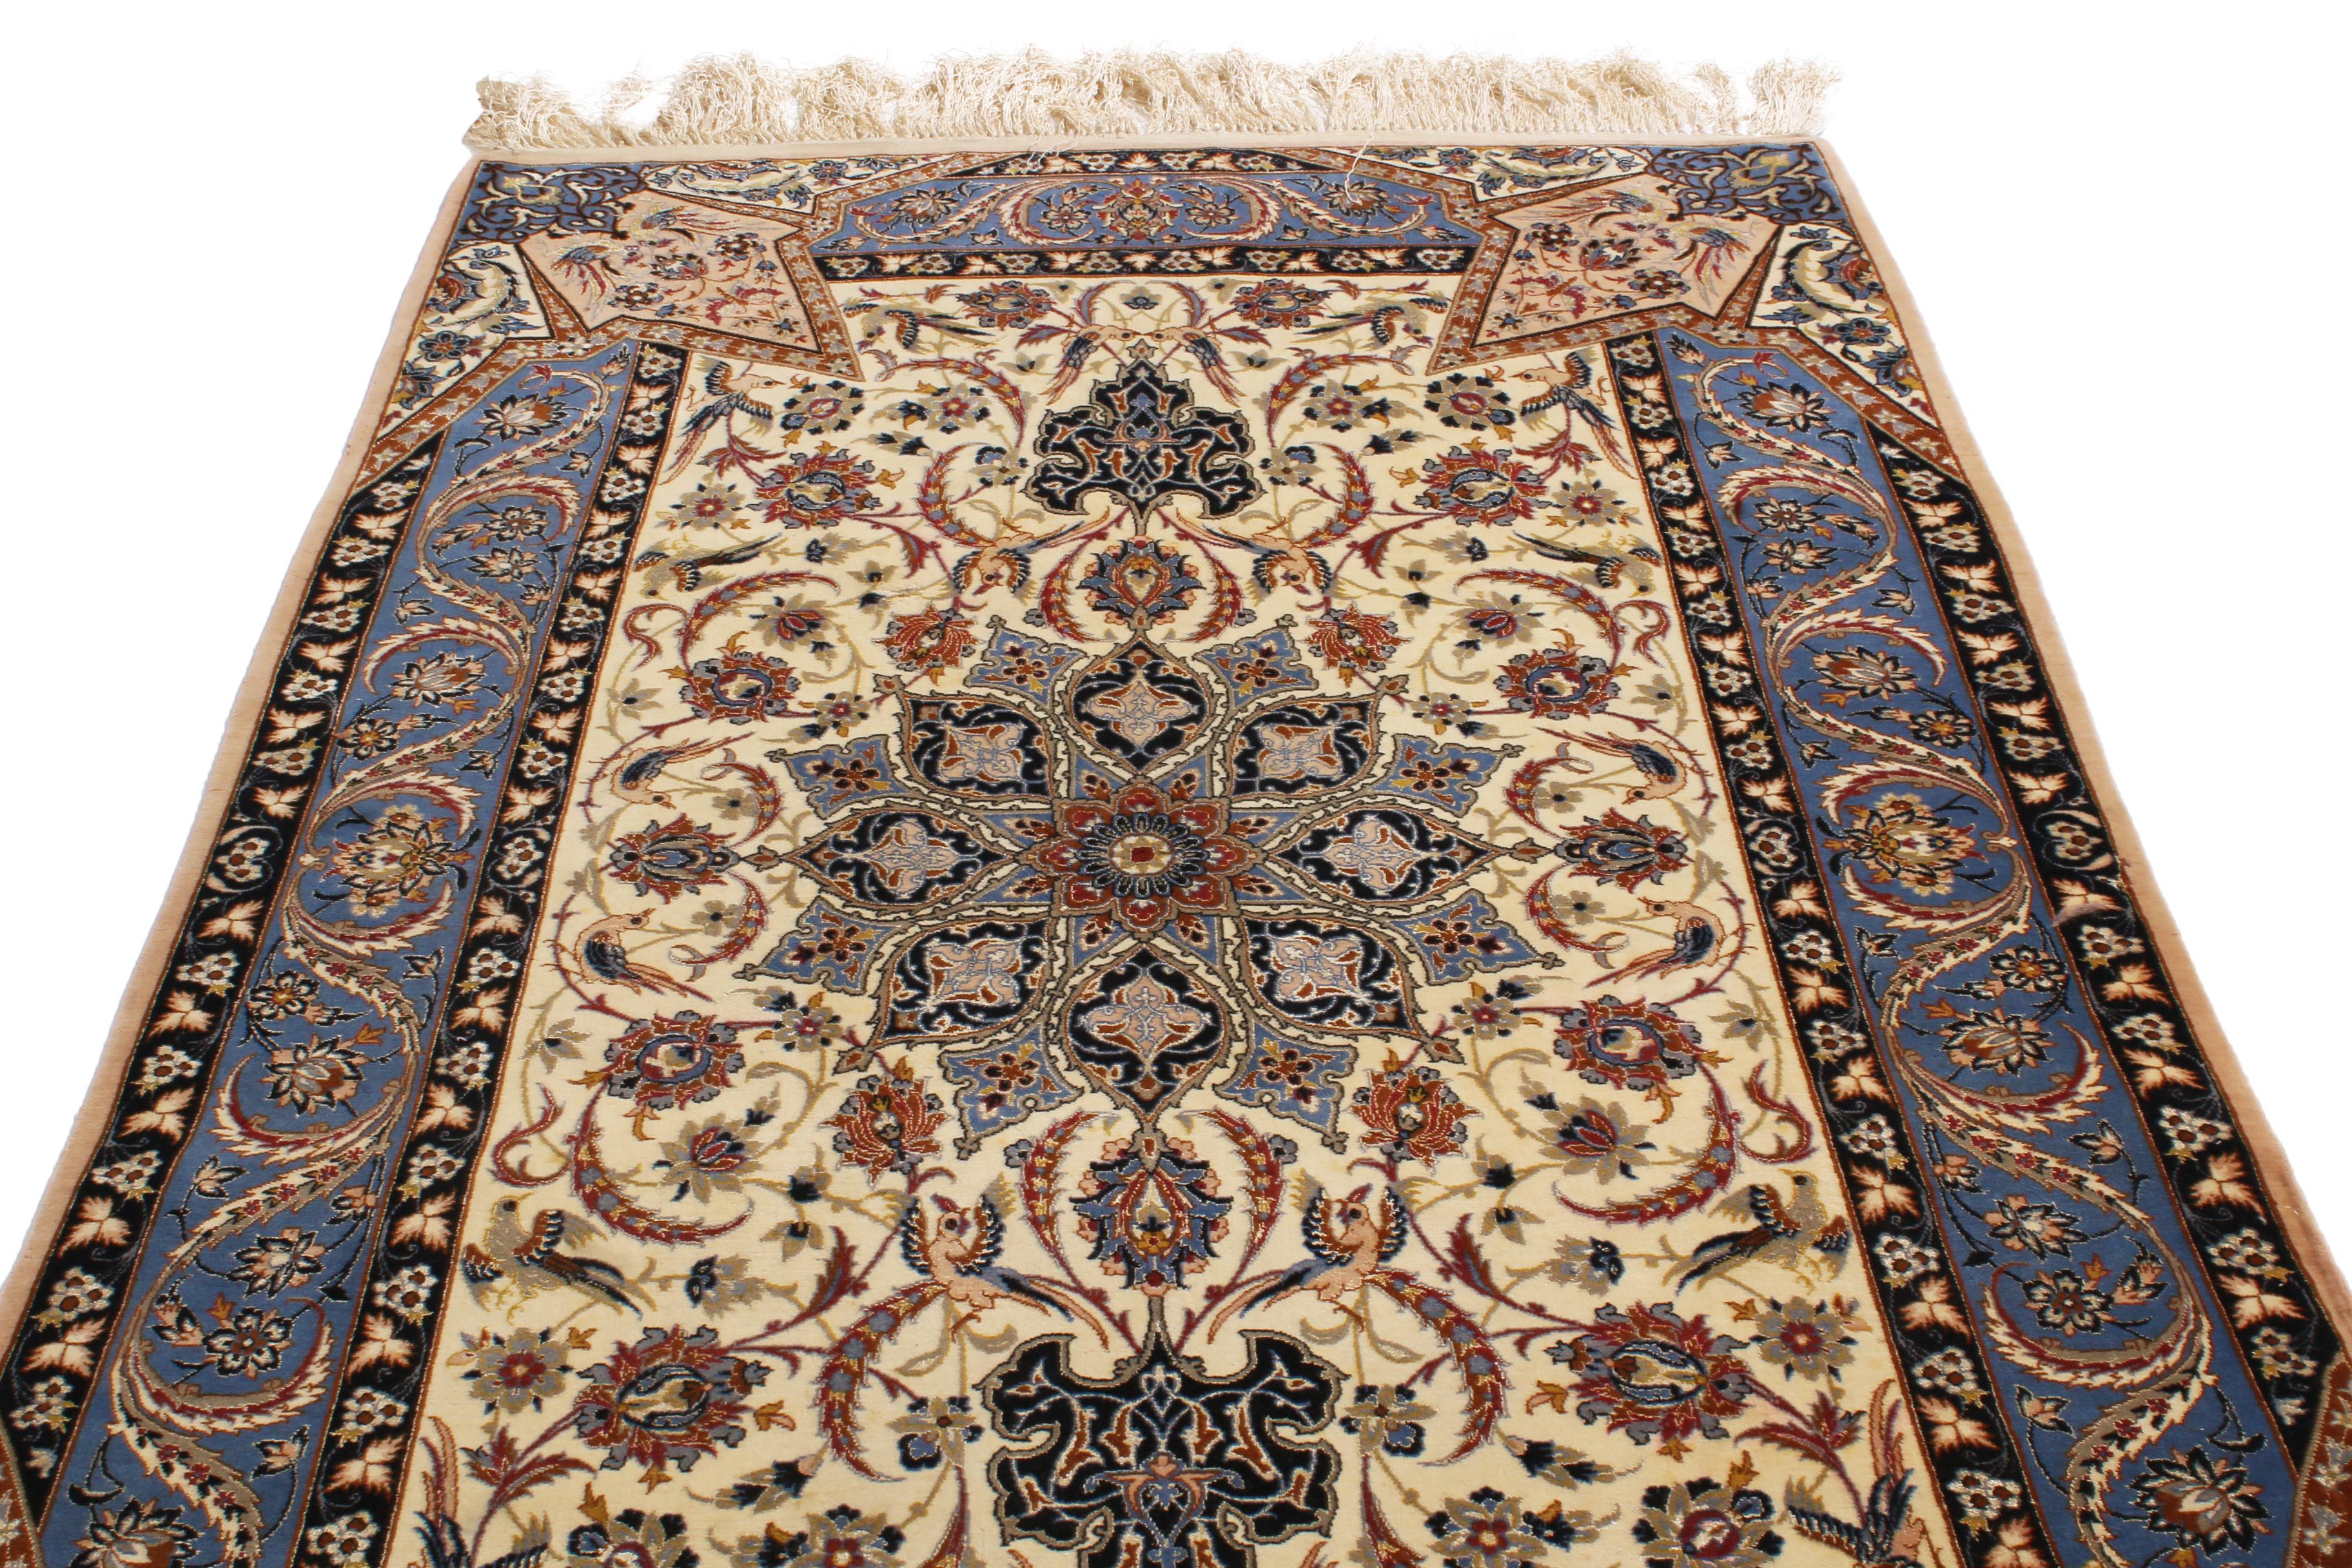 Hand knotted in high-quality wool and naturally luminous silk originating from Persia in the 1970s, this Isfahan Persian rug was inspired from a remarkable 17th century field design with unique, dimensional border permeating the field in the form of